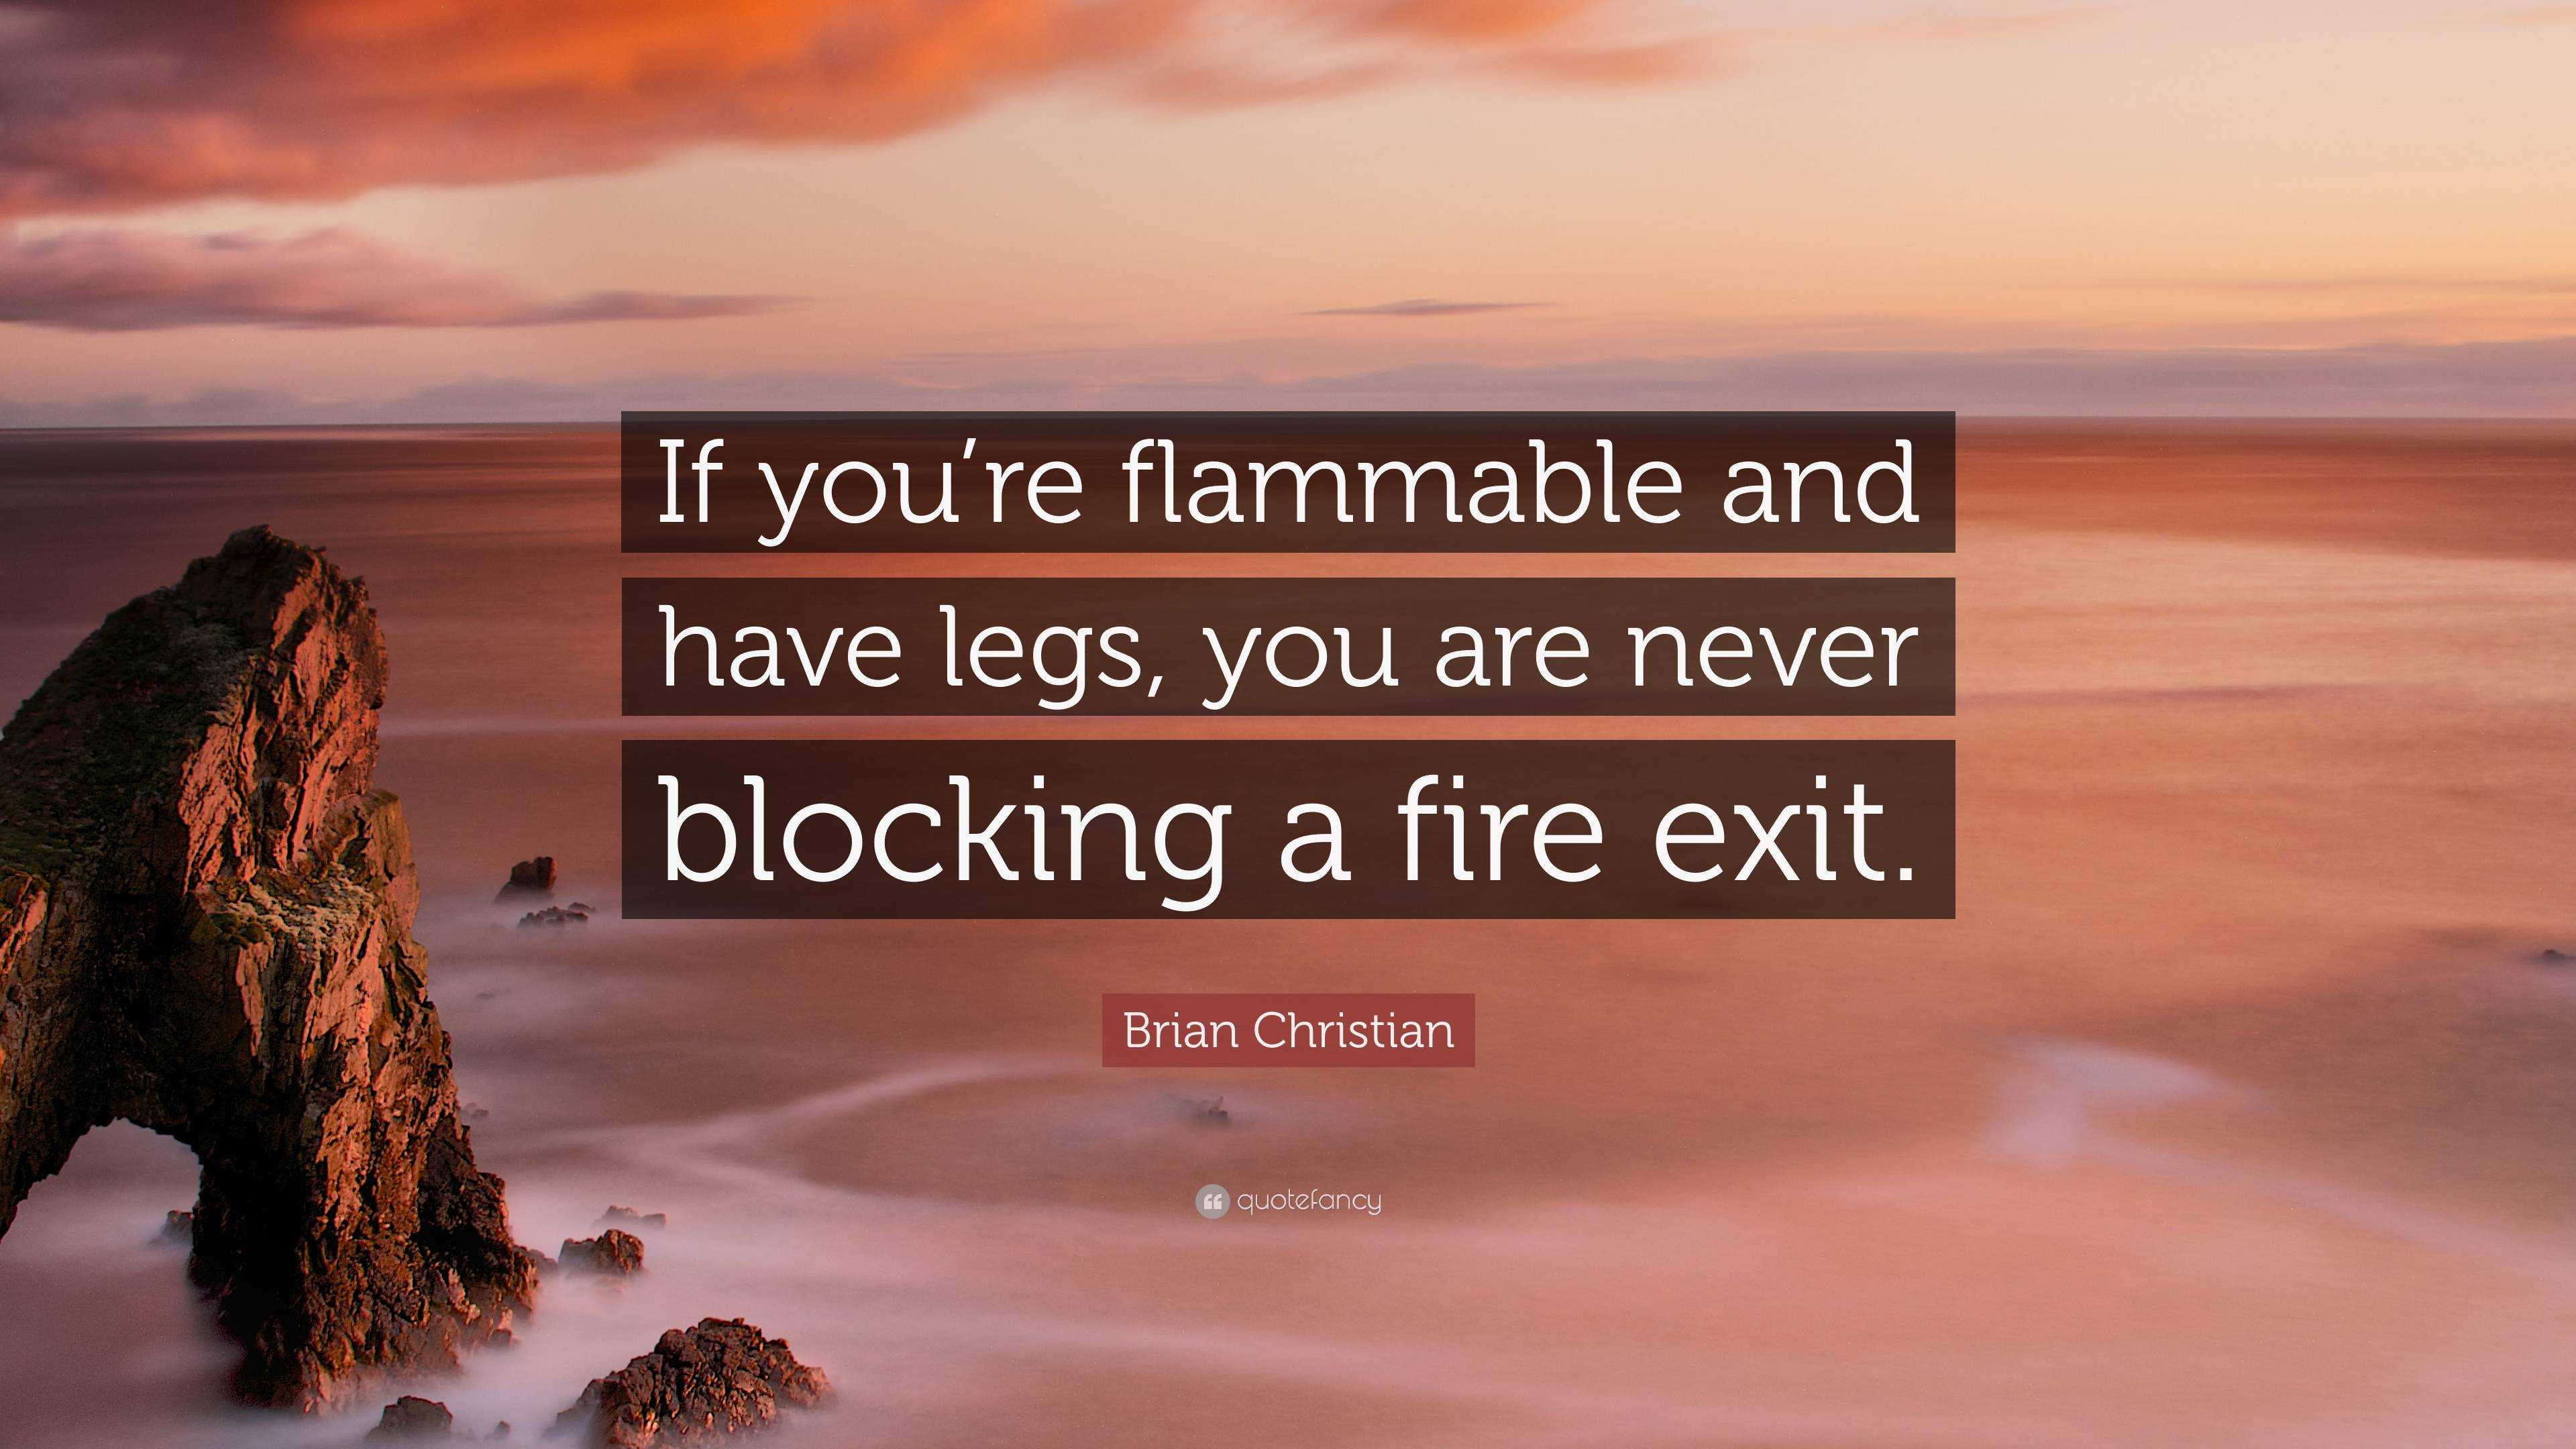 brian-christian-quote-if-you-re-flammable-and-have-legs-you-are